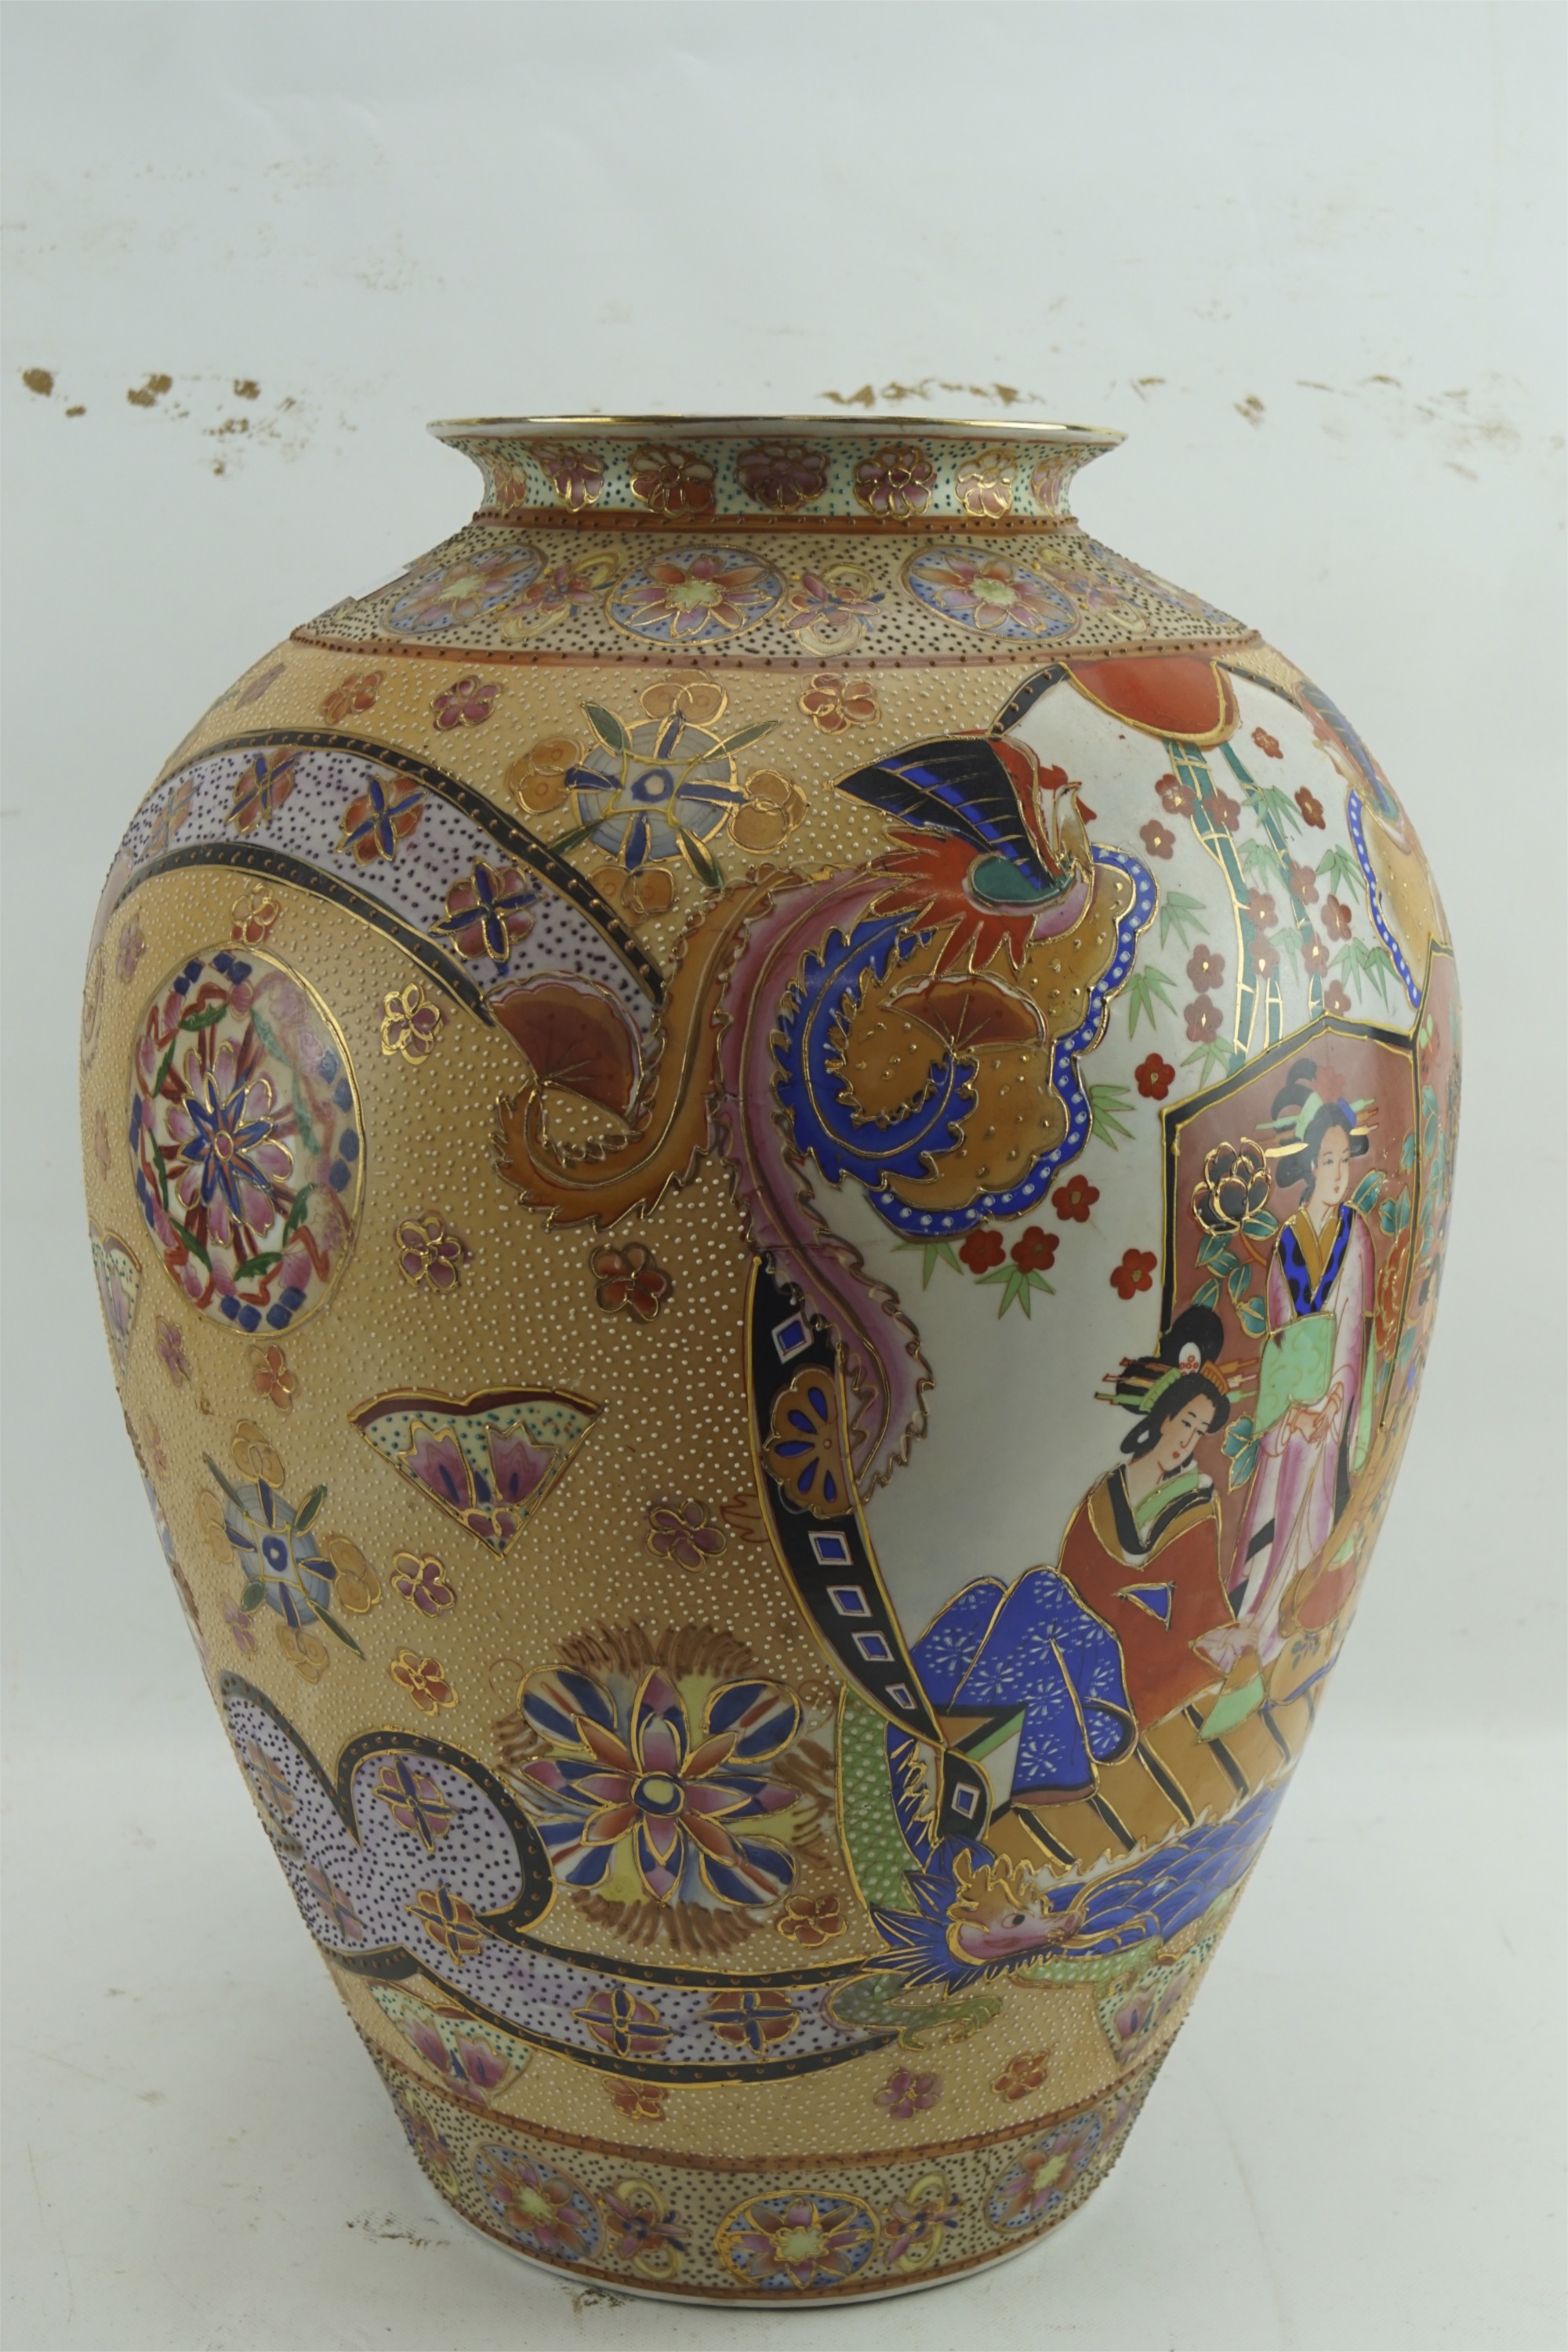 A large contemporary Japanese vase.